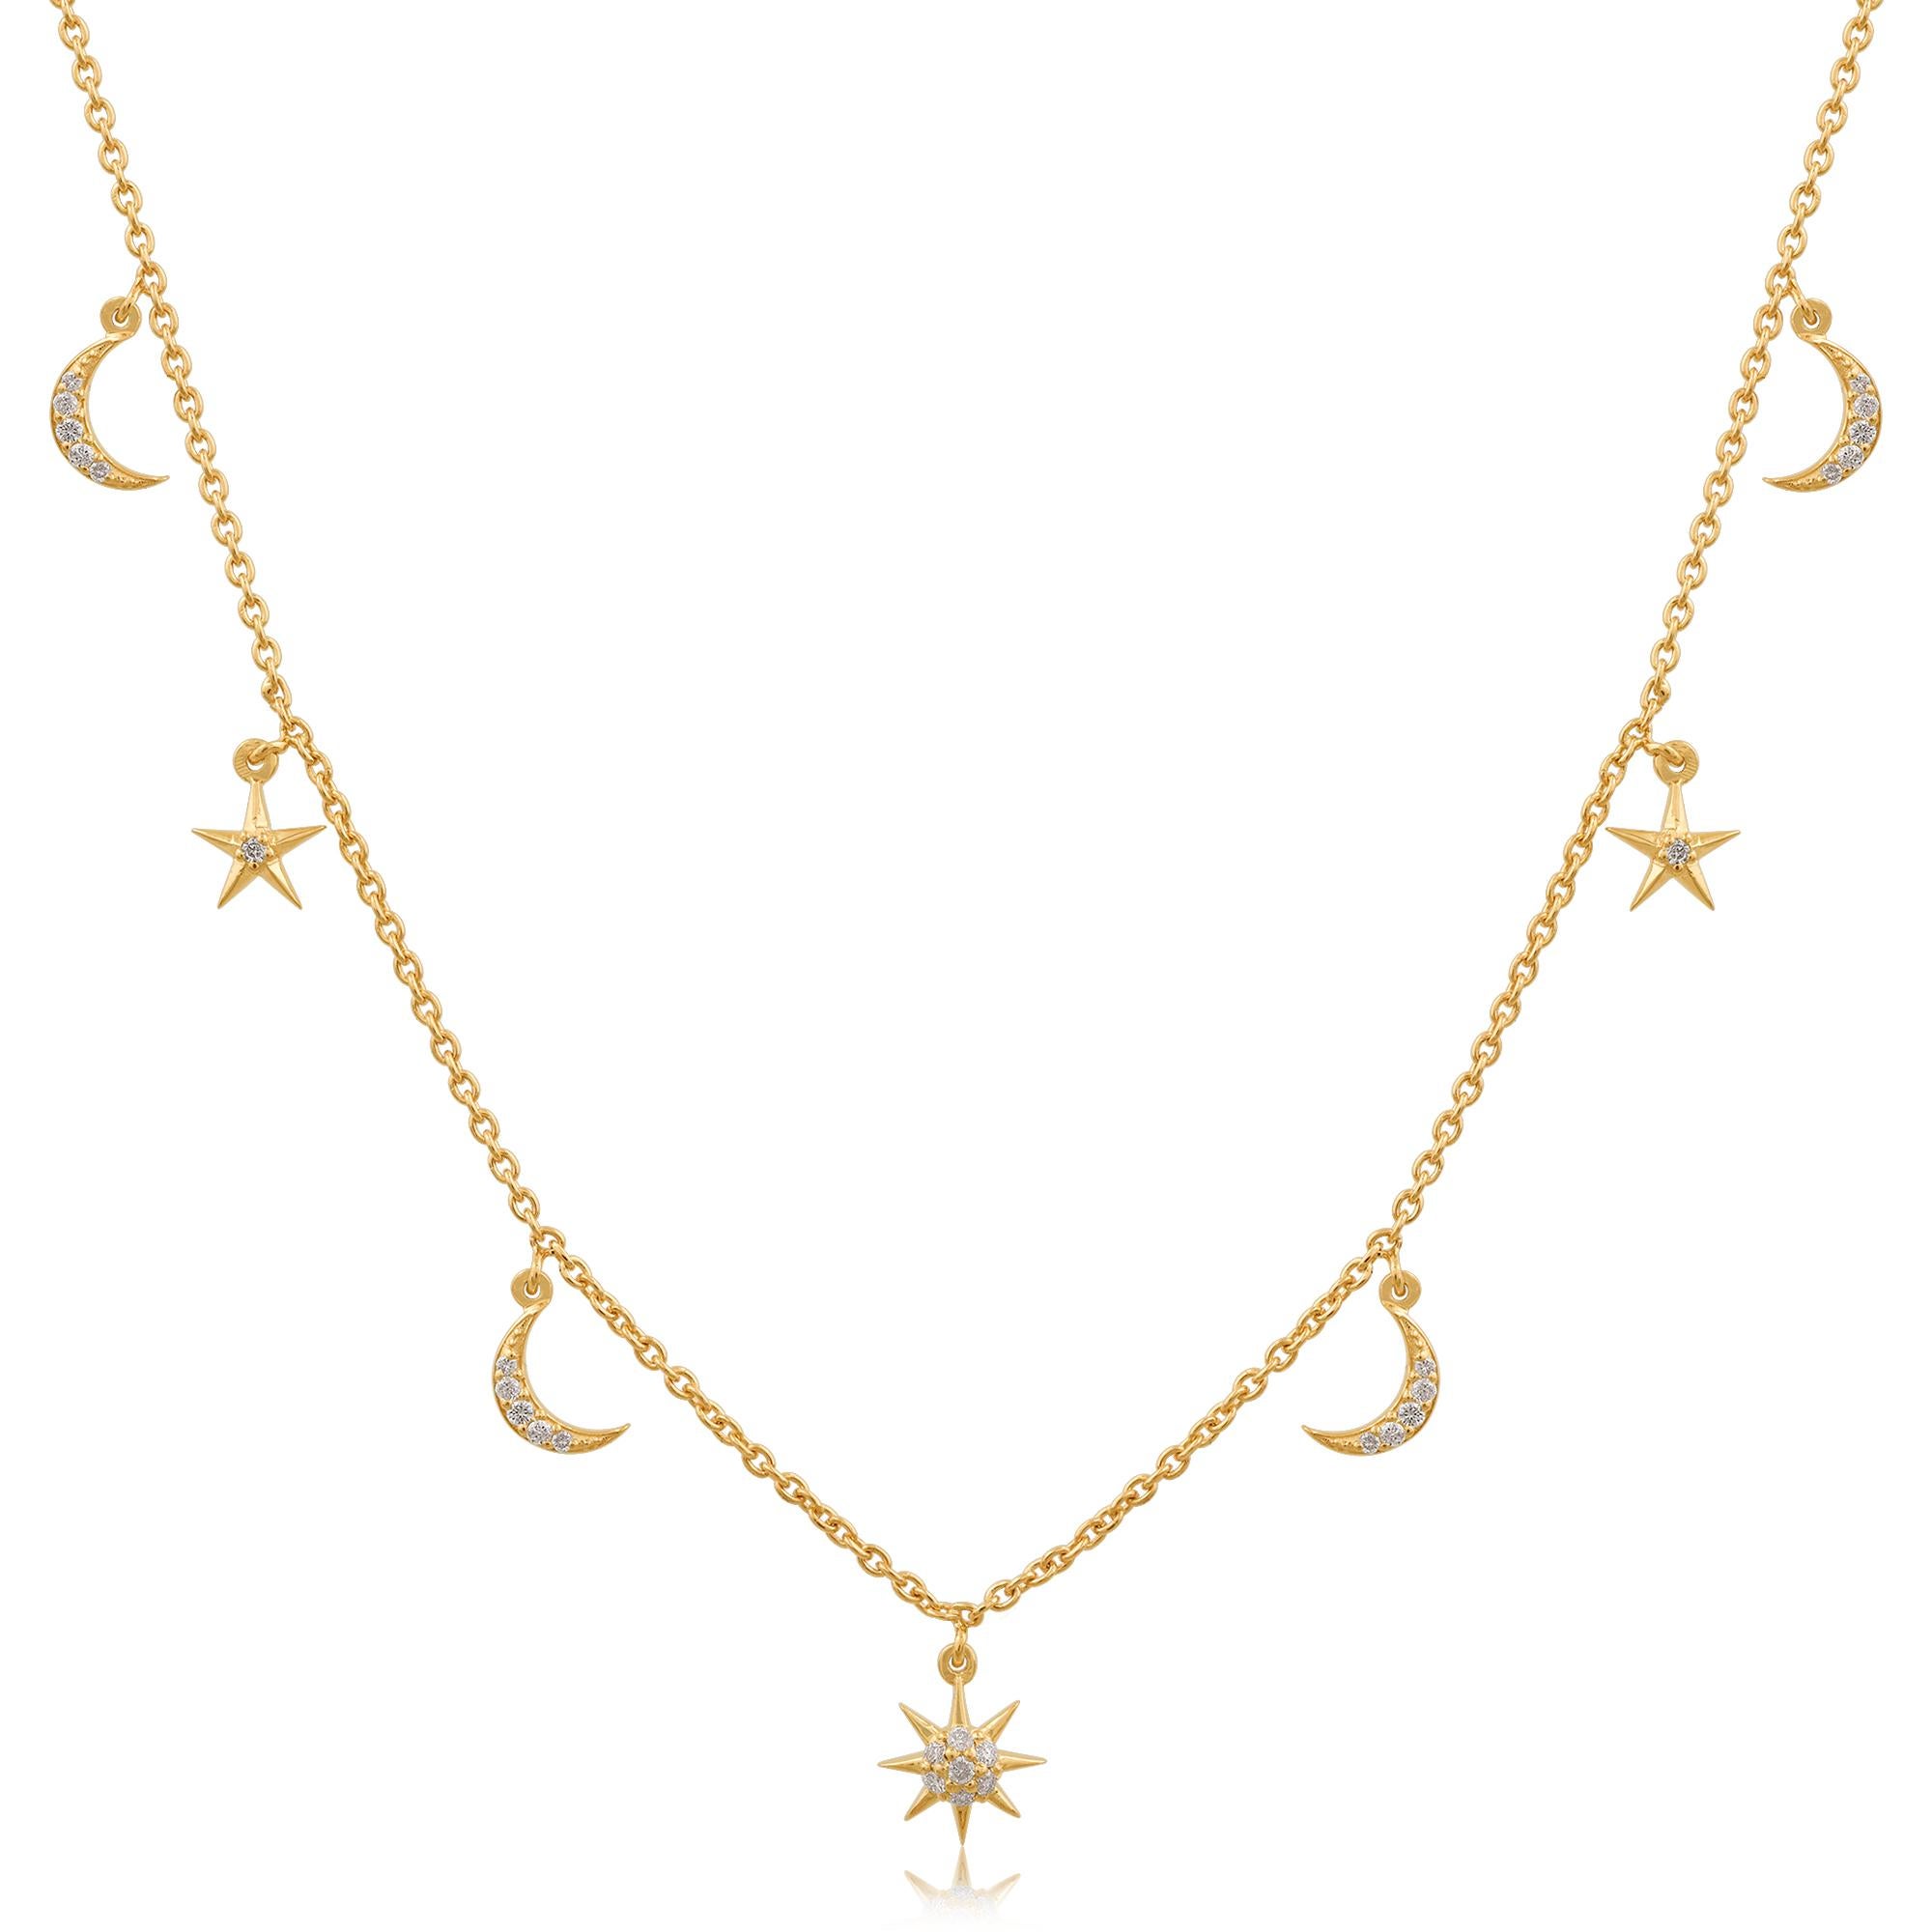 Add a touch of celestial beauty to your jewelry collection with this stunning 0.19 Carat SI/HI Diamond Moon & Starburst Charm Necklace. Crafted from 14 karat yellow gold, this enchanting piece is designed to capture the essence of the night sky.
The